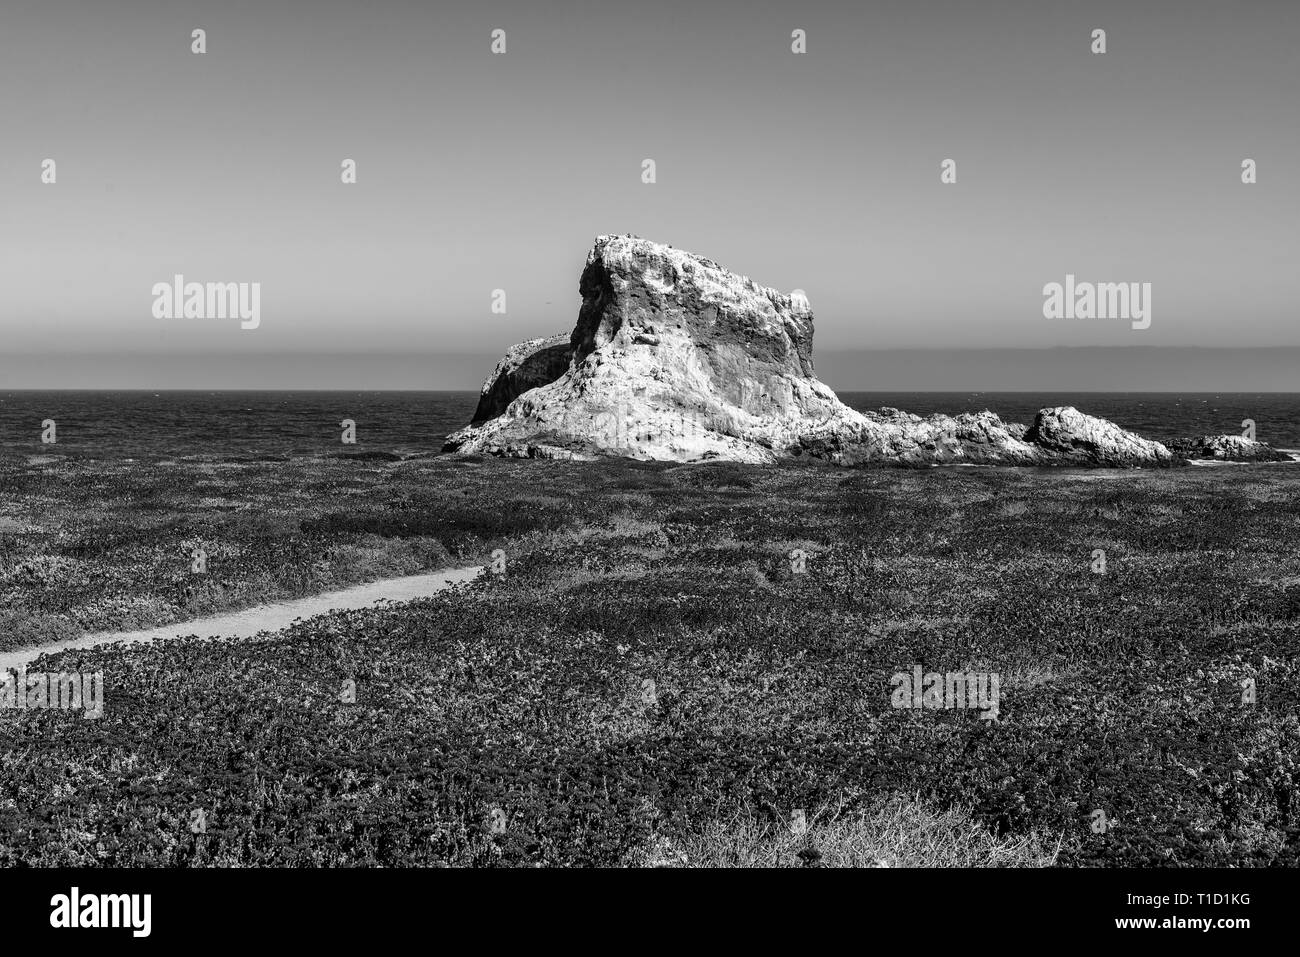 Black and white. Field with wildflowers and hiking path leading towards large rock formations in the sea. Stock Photo